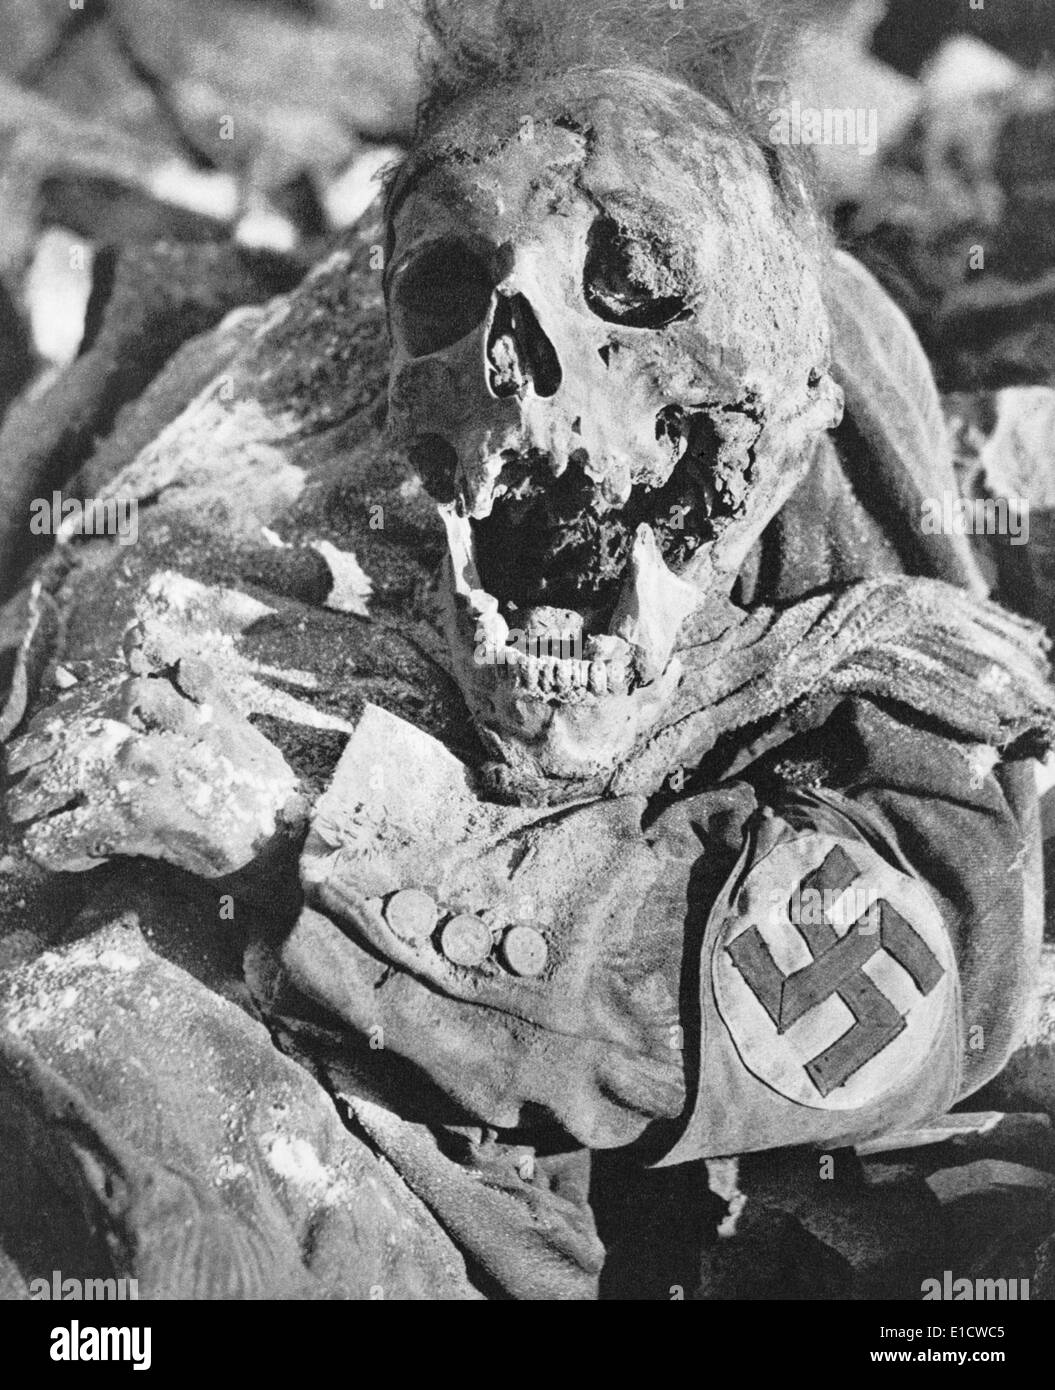 Decomposing corpse of man with swastika arm band in Dresden, Germany. Photo by Richard Peter was taken months the Allied World Stock Photo